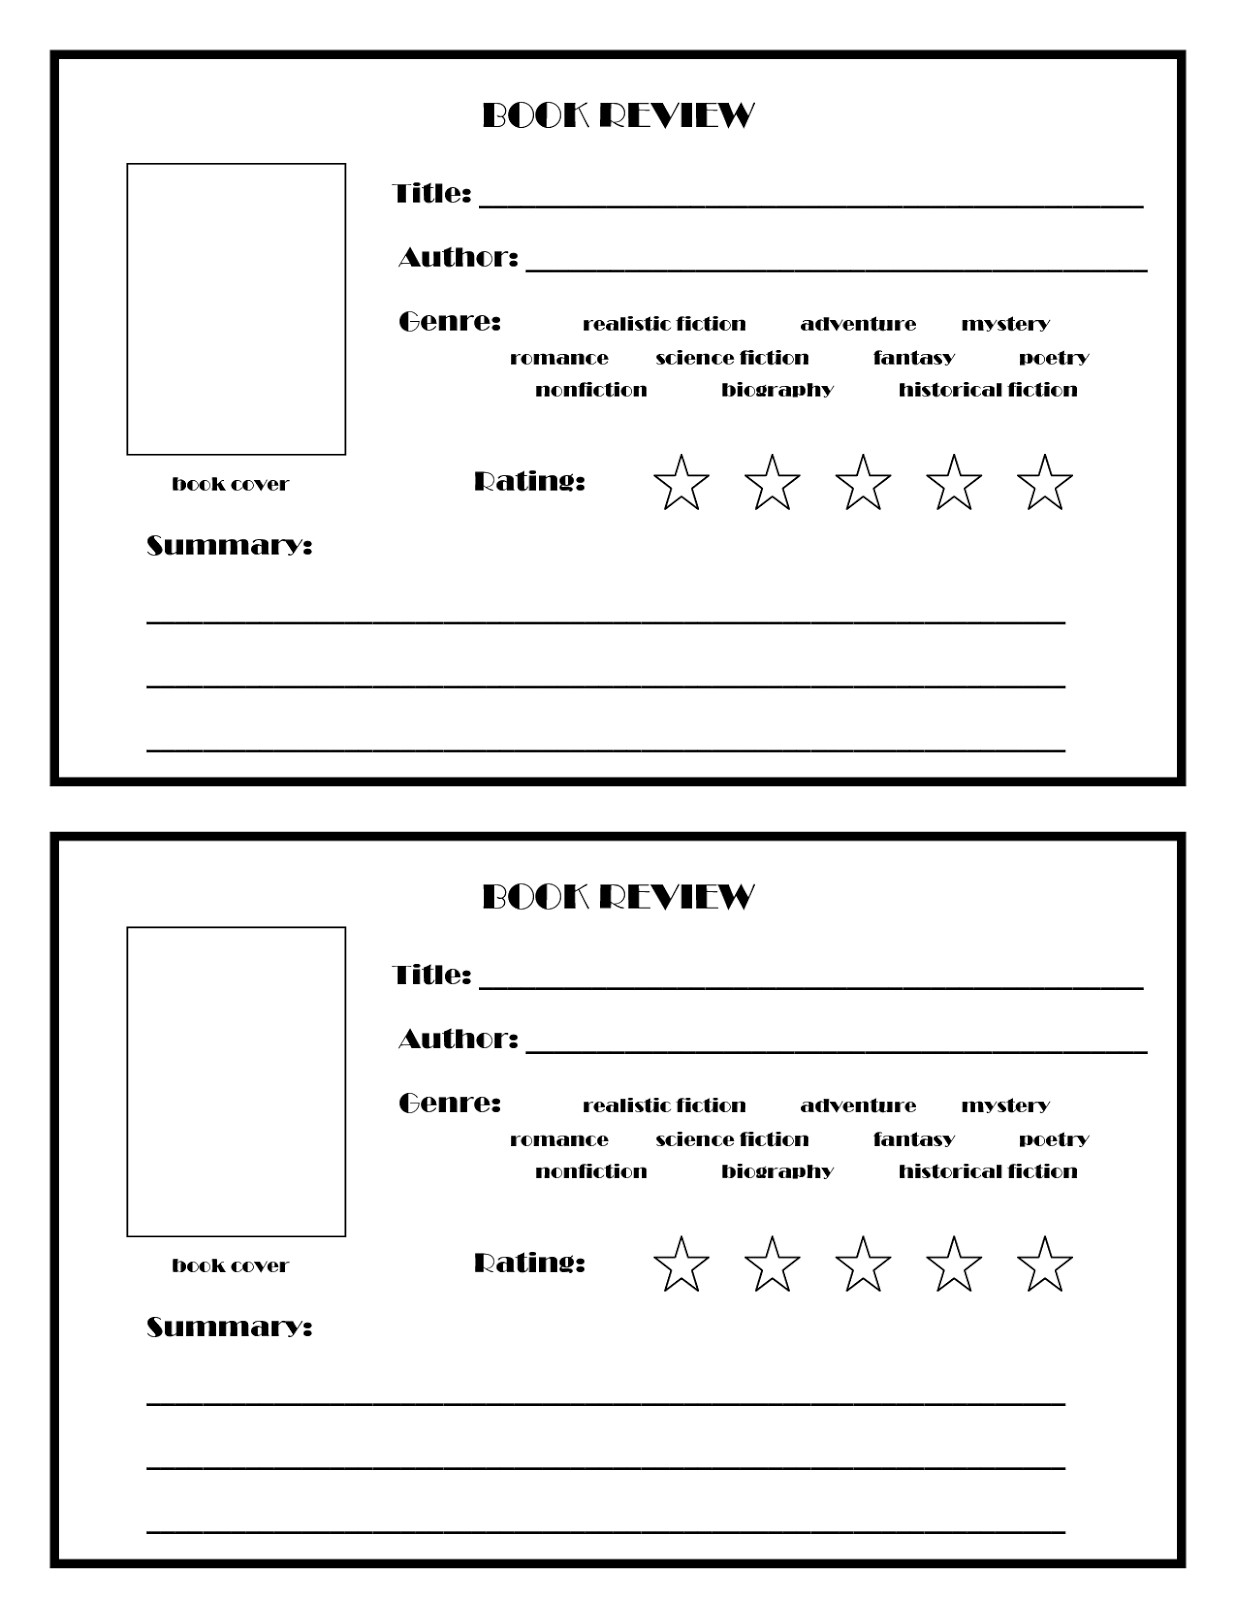 7-best-images-of-book-review-printable-template-book-review-template-free-printable-book